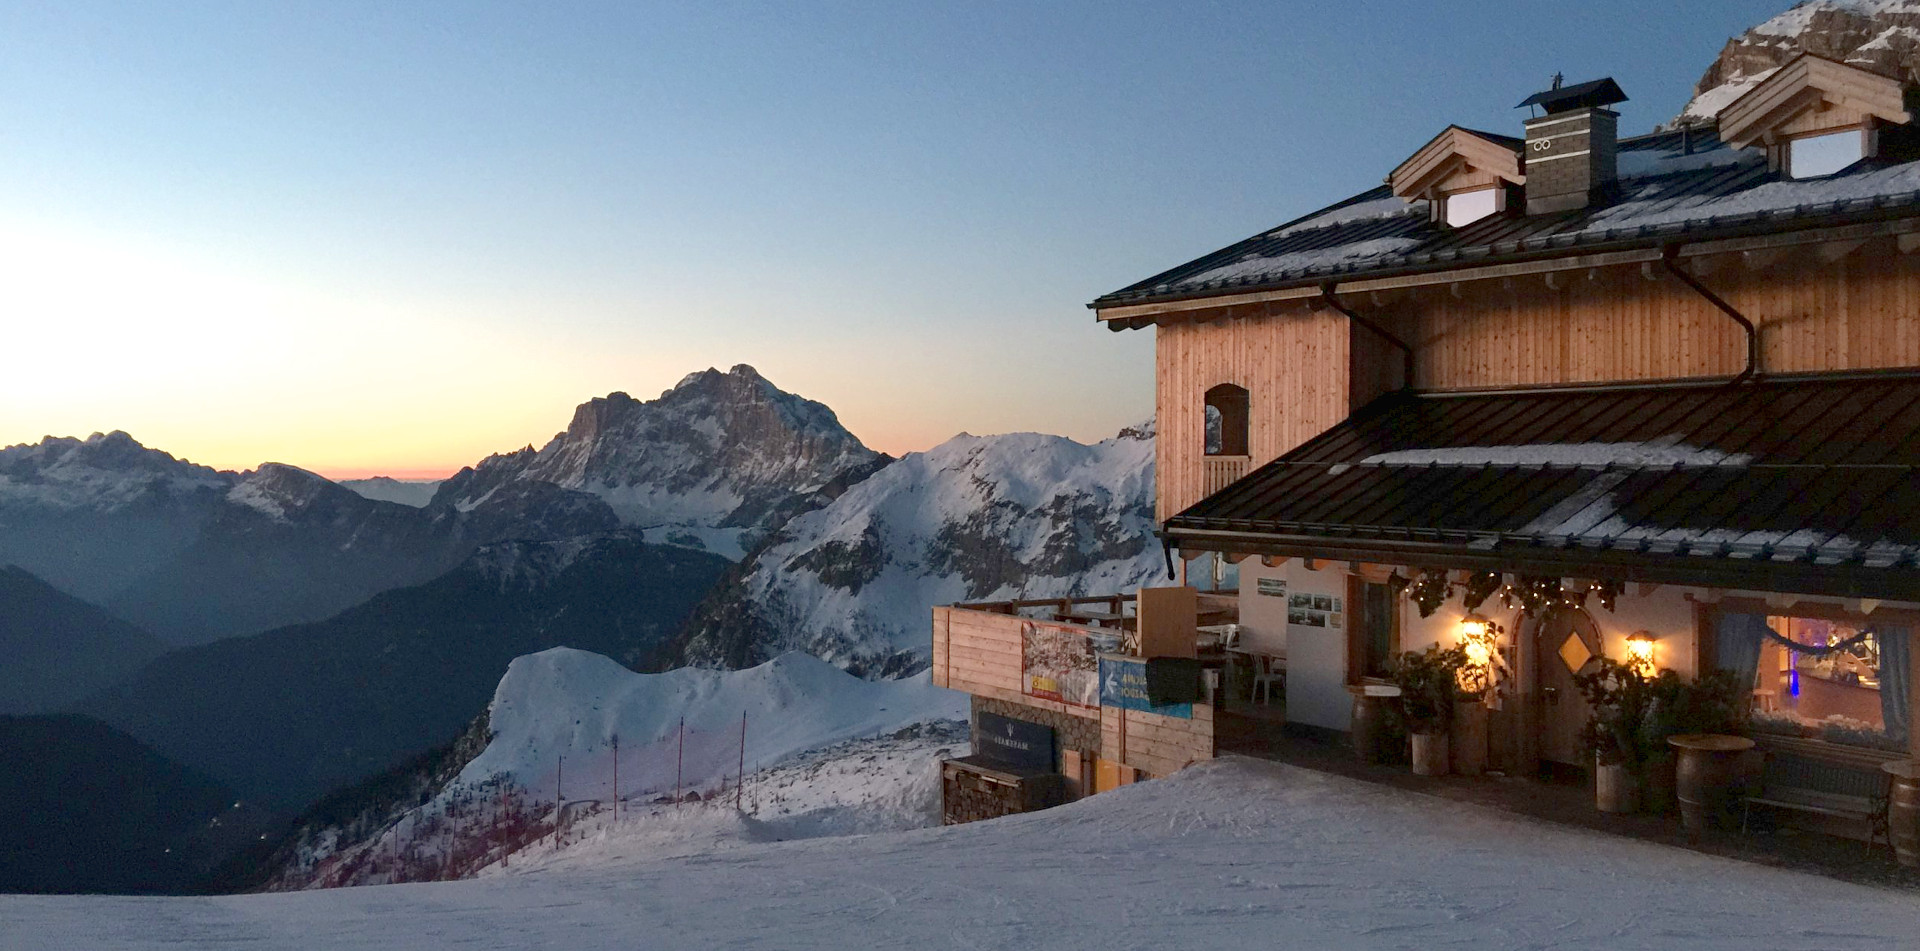 A cozy 'rifugio' is waiting for you!